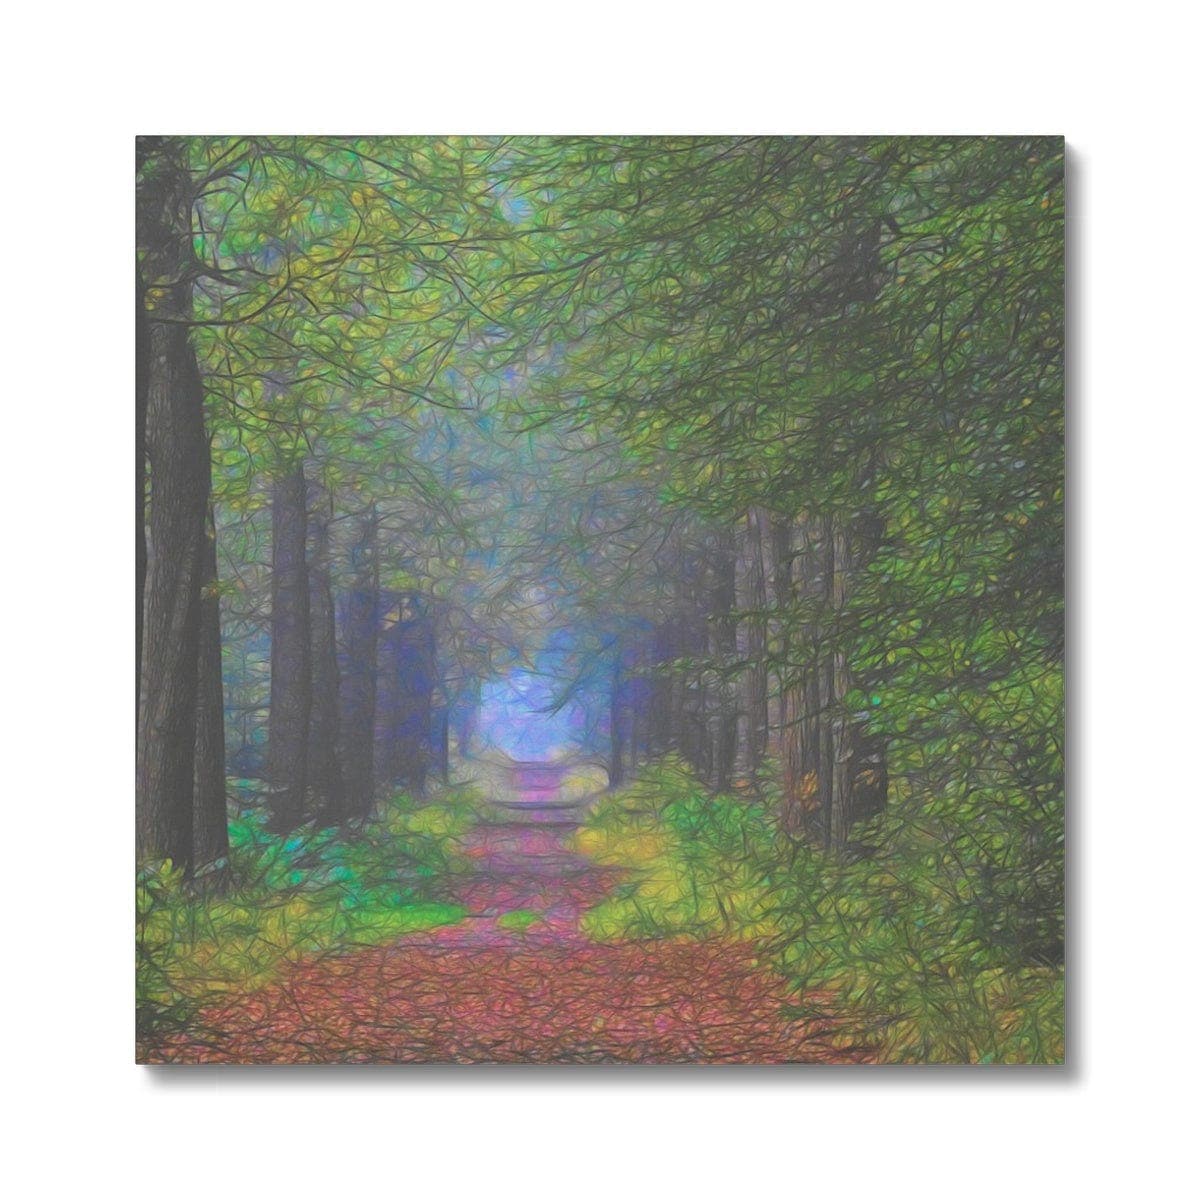 Forest lane, digital art on Canvas, by Mother nature photography